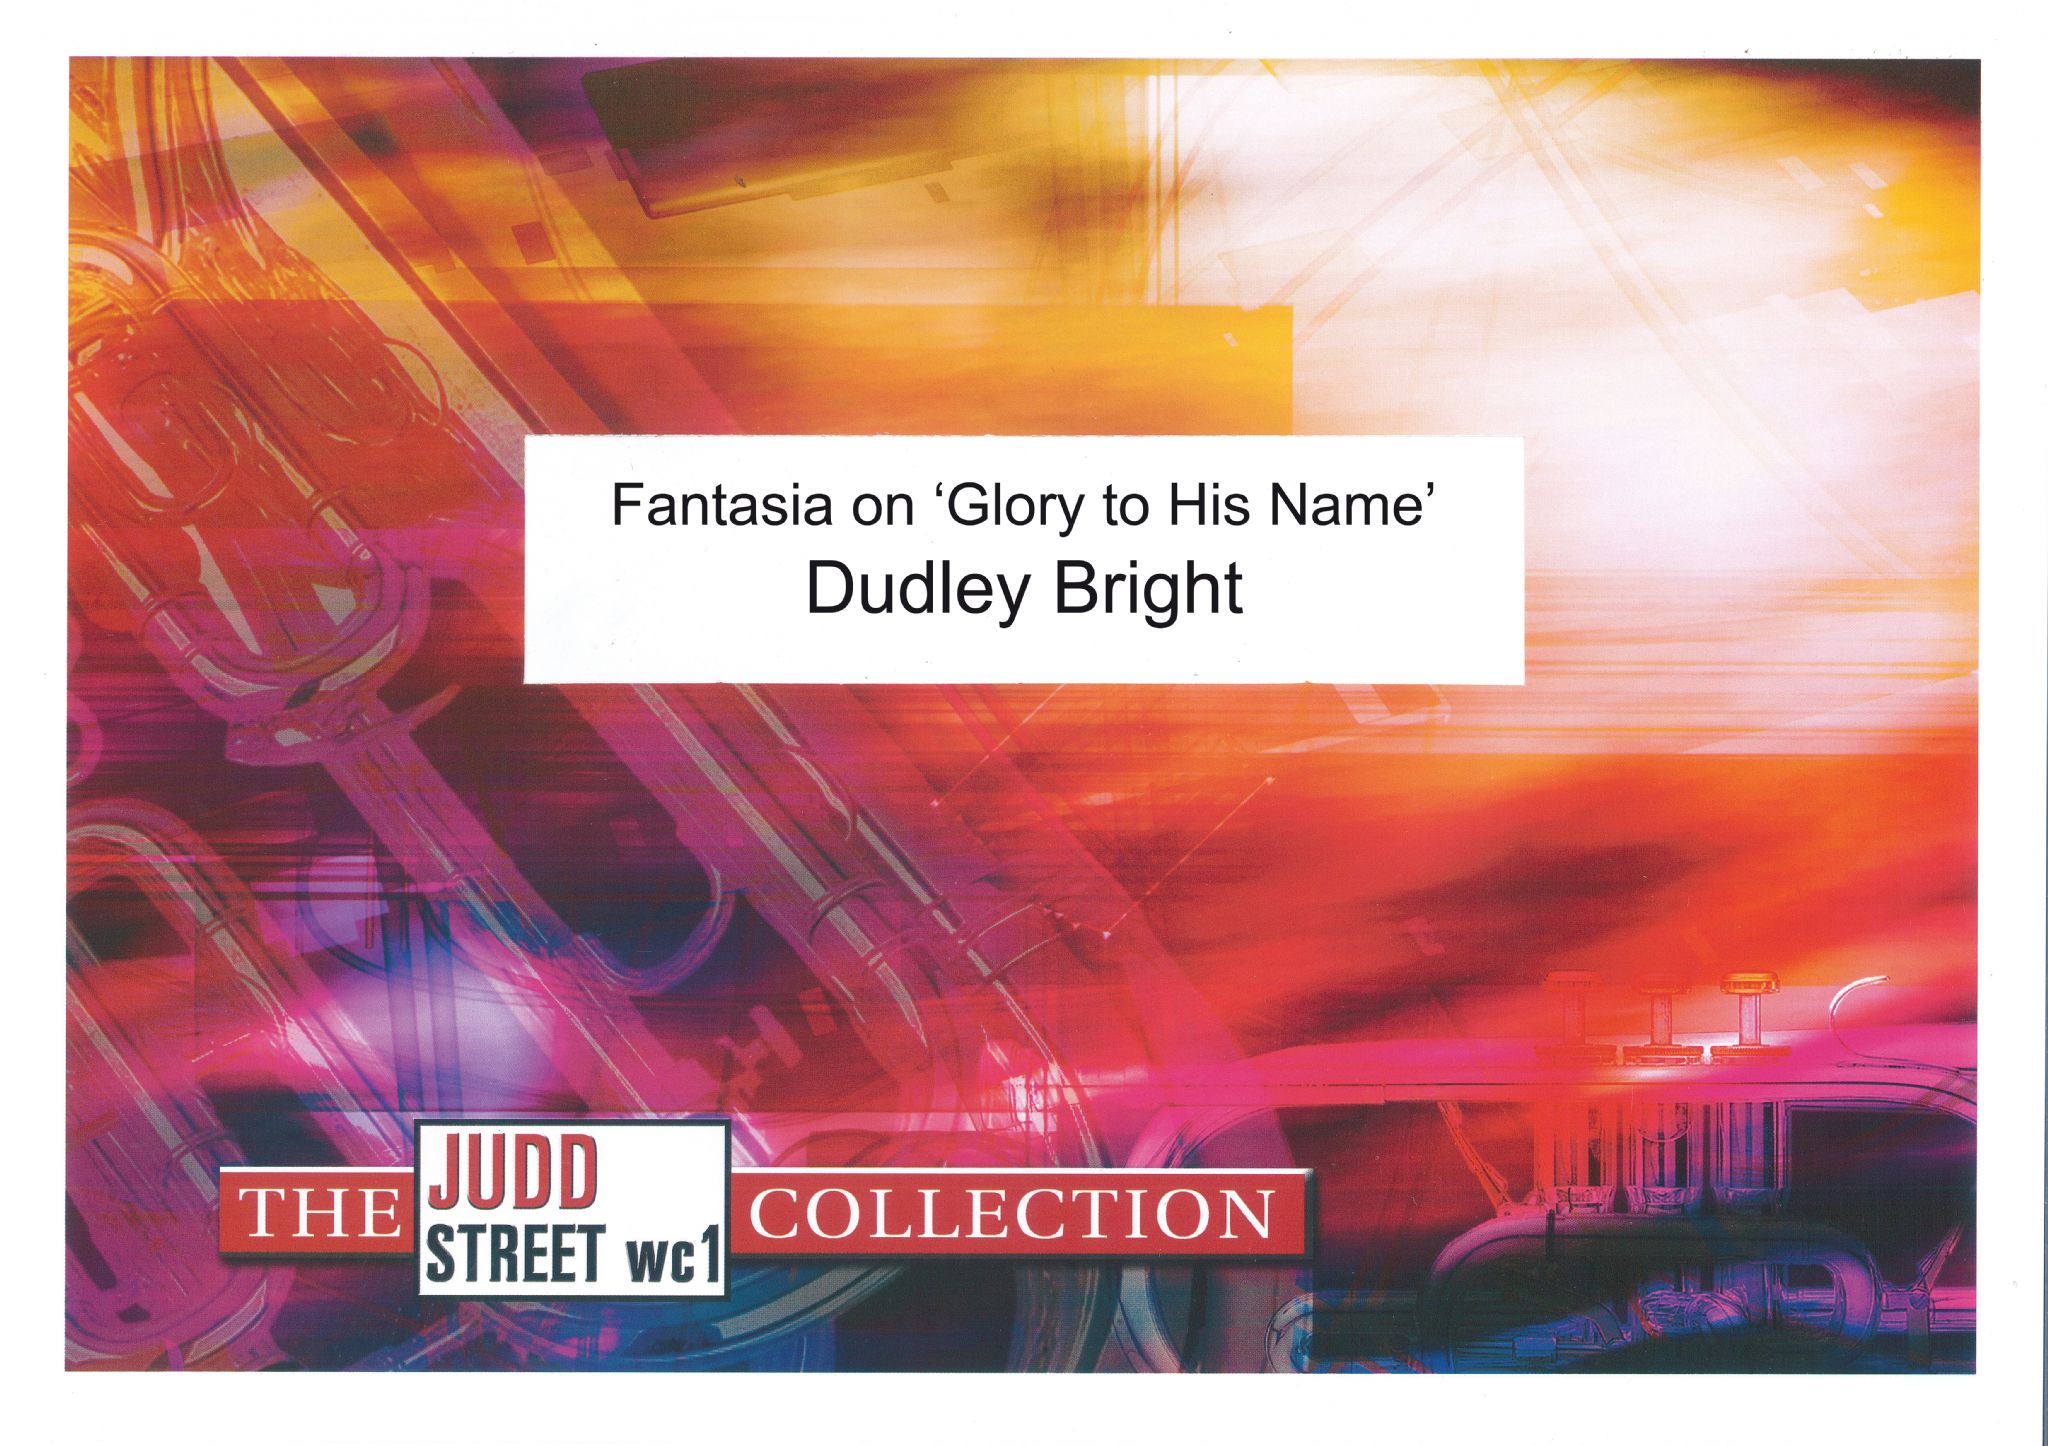 Judd: Fantasia on 'Glory to His Name' - Dudley Bright